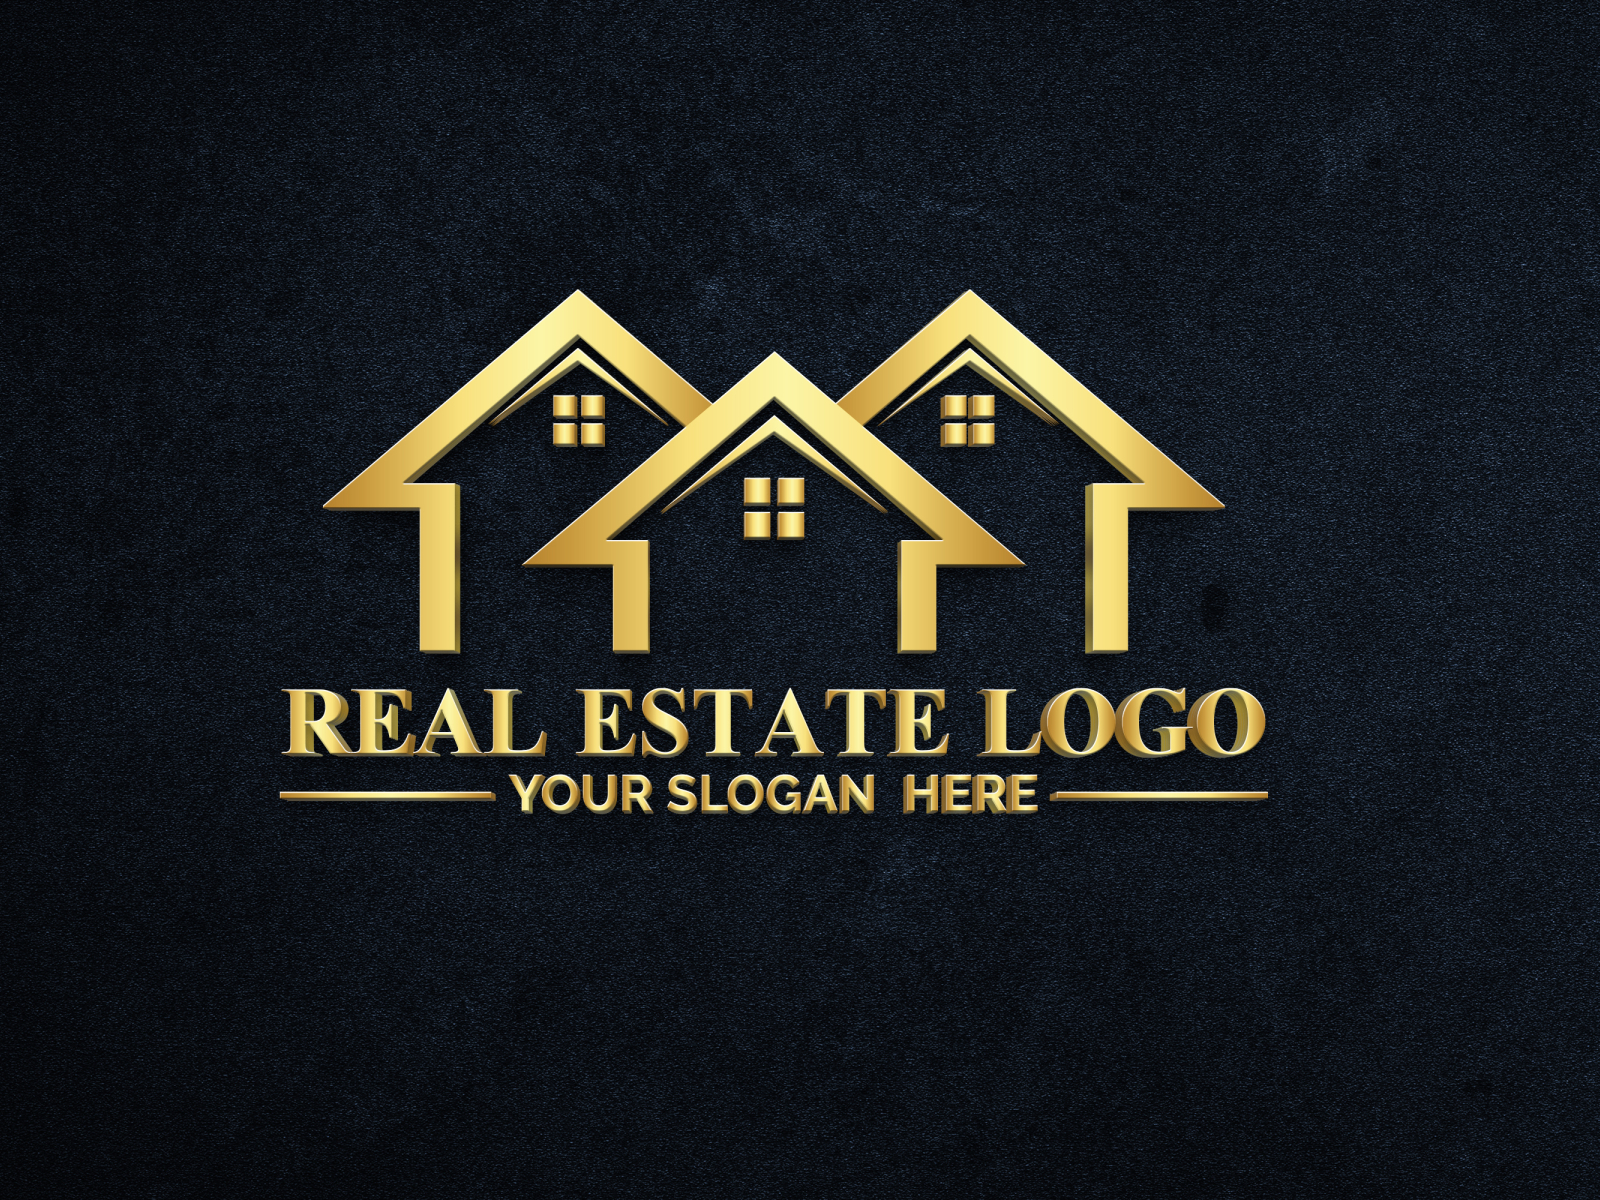 Real Estate, Property, Mortgage, Home, Realtor, Building, Logo by ...